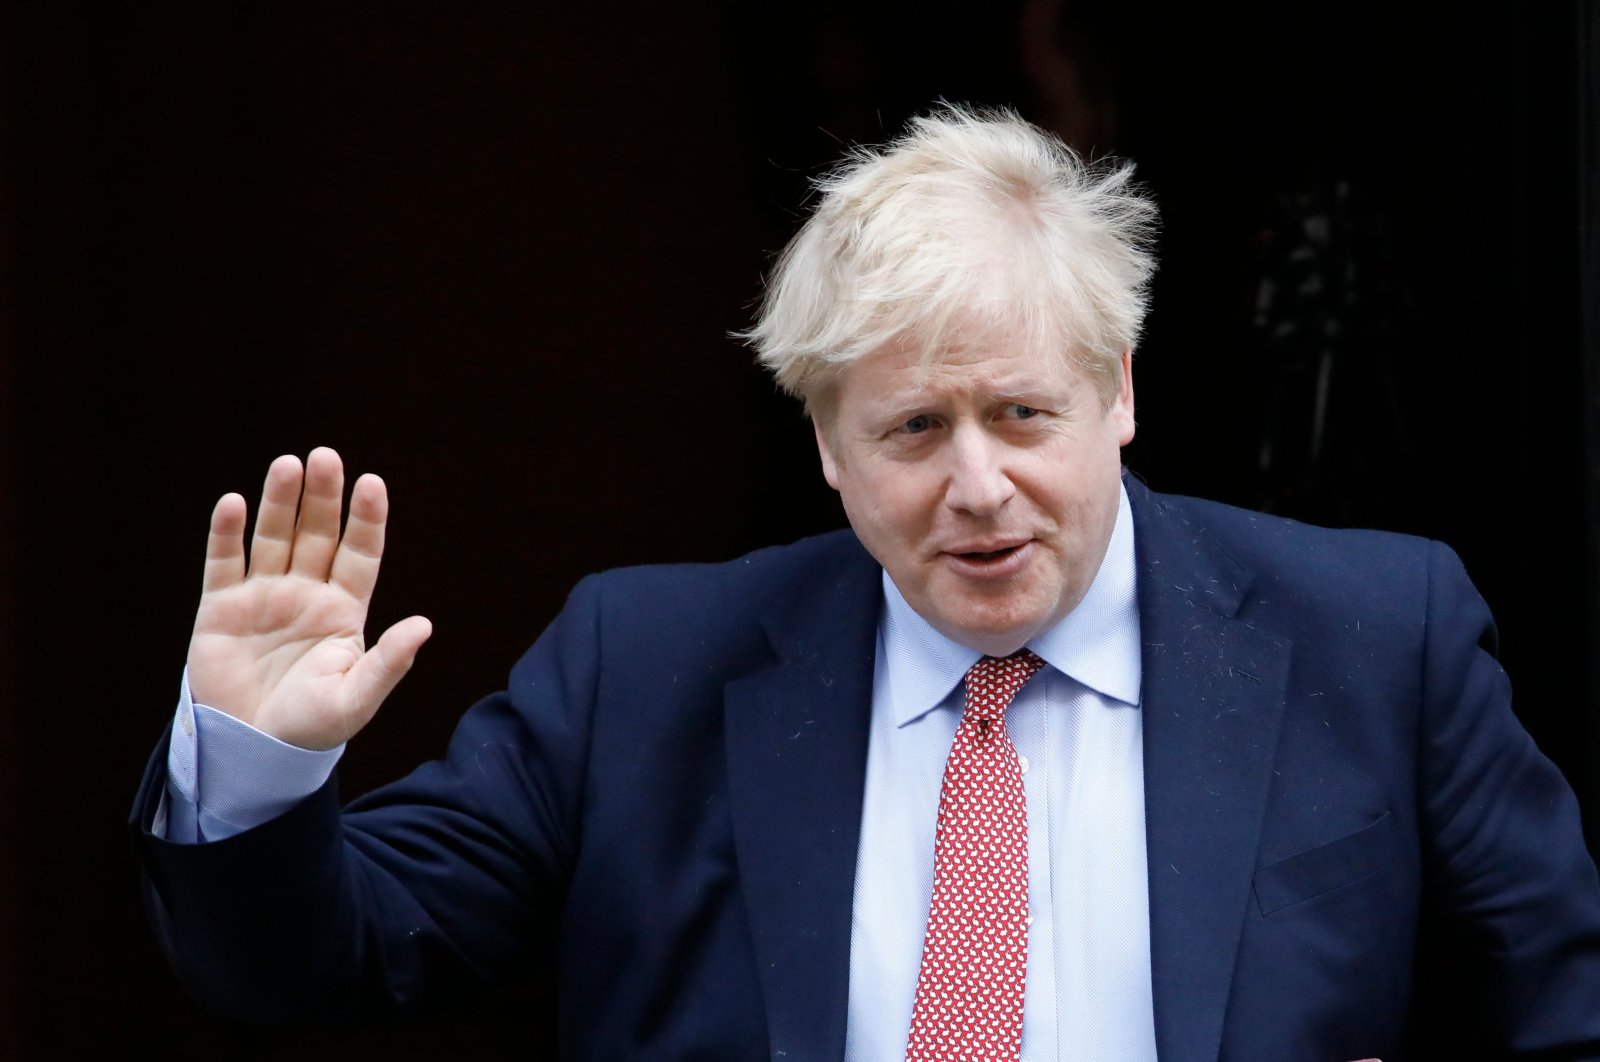 Britain's Prime Minister Boris Johnson leaves No. 10 Downing Street in central London on his way to the House of Commons to attend Prime Minister's Questions, Wednesday, March 25, 2020. (AFP Photo)